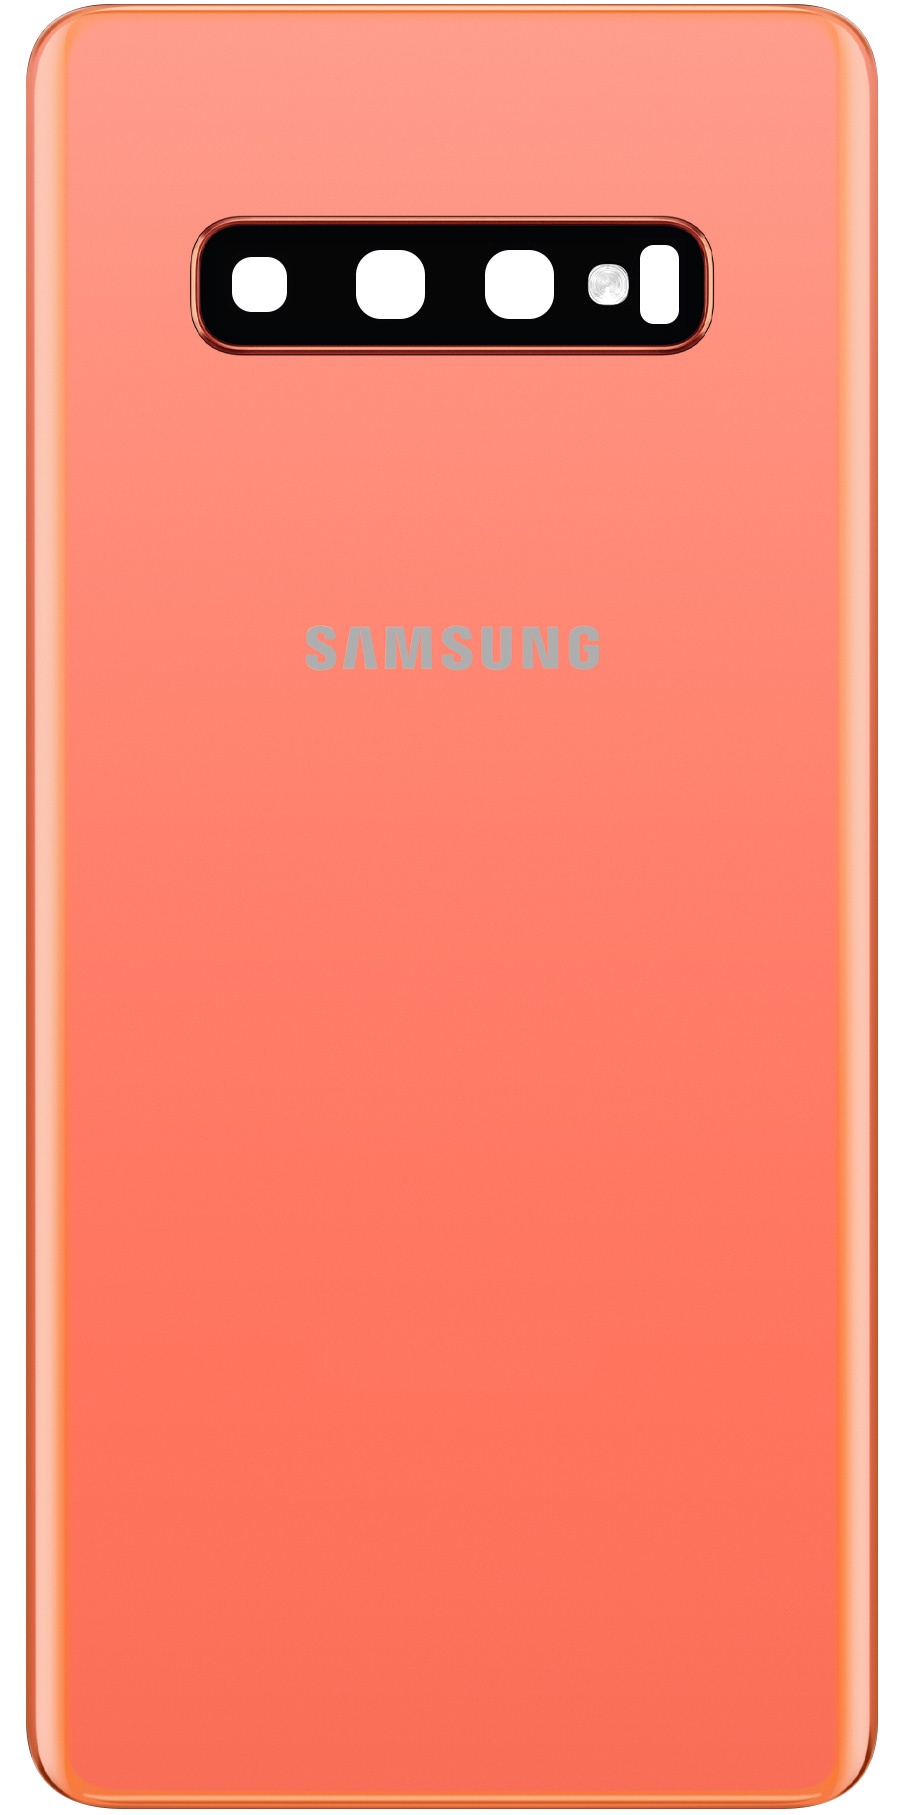 Capac Baterie Samsung Galaxy S10+ G975, Roz (Flamingo Pink), Service Pack GH82-18378D 